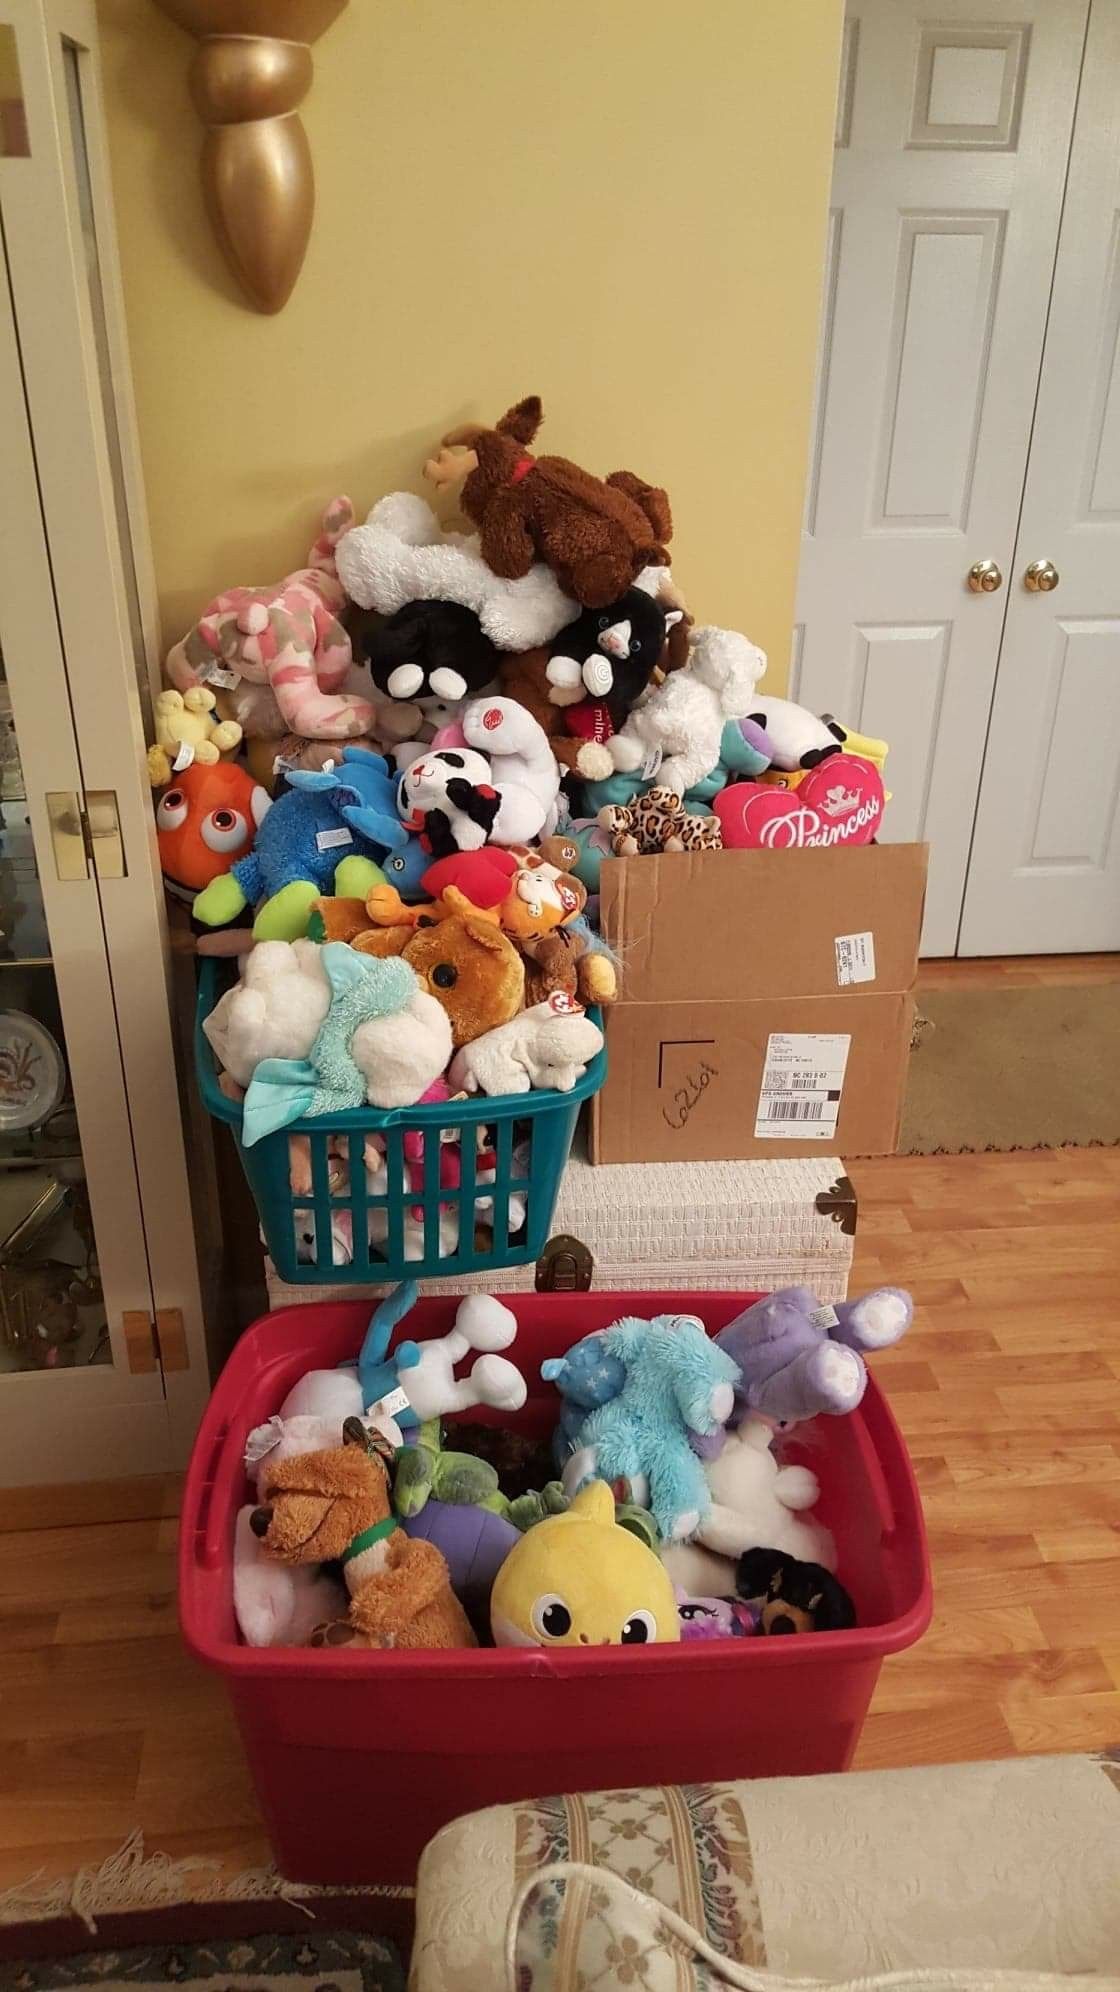 Stuffed animals or best offer.